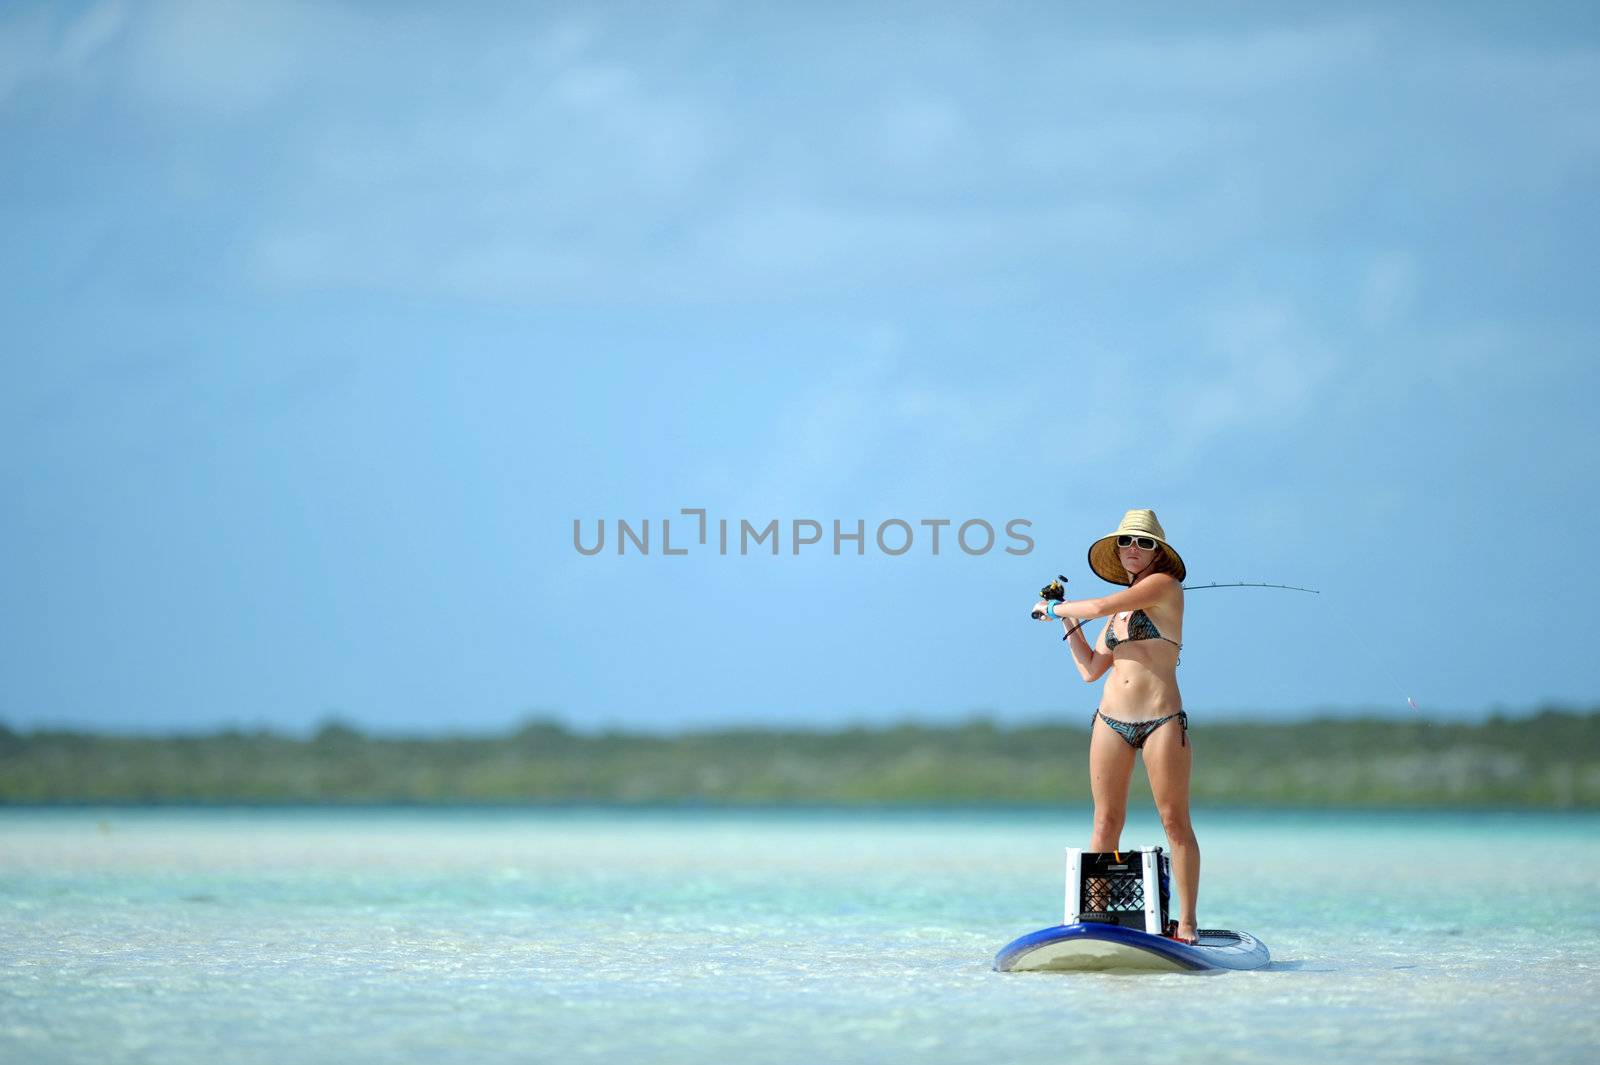 Fishing and paddleboarding in tropical destination by ftlaudgirl